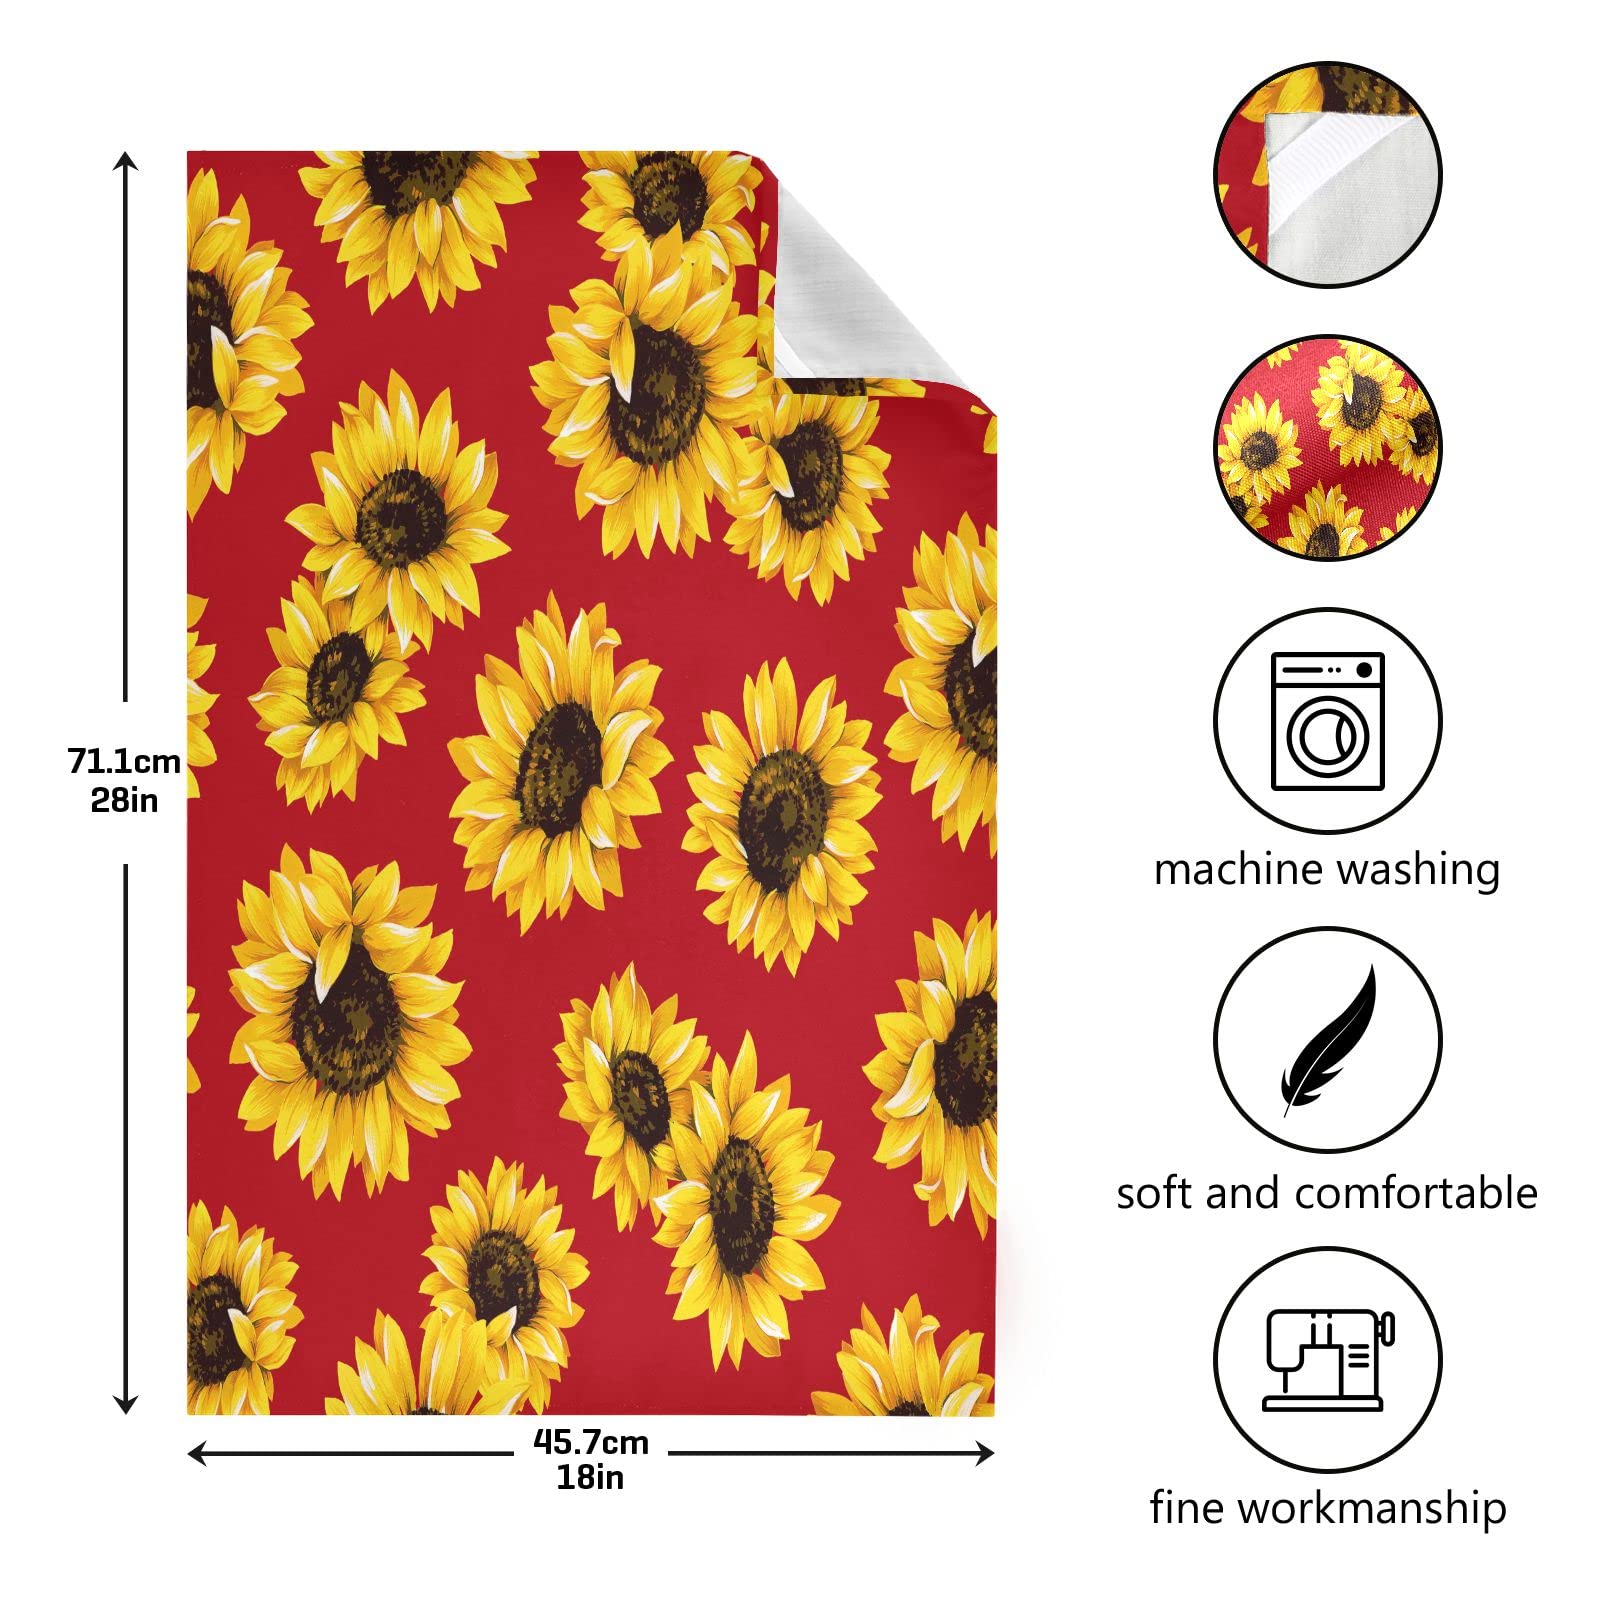 xigua Red Sunflower Kitchen Towels Dish Clothes Soft and Rapid Drying and Absorbent 1PCS Dishcloths Reusable Towels for Kitchen Bathroom Hotel Household Hand Towels 29"X18" inch